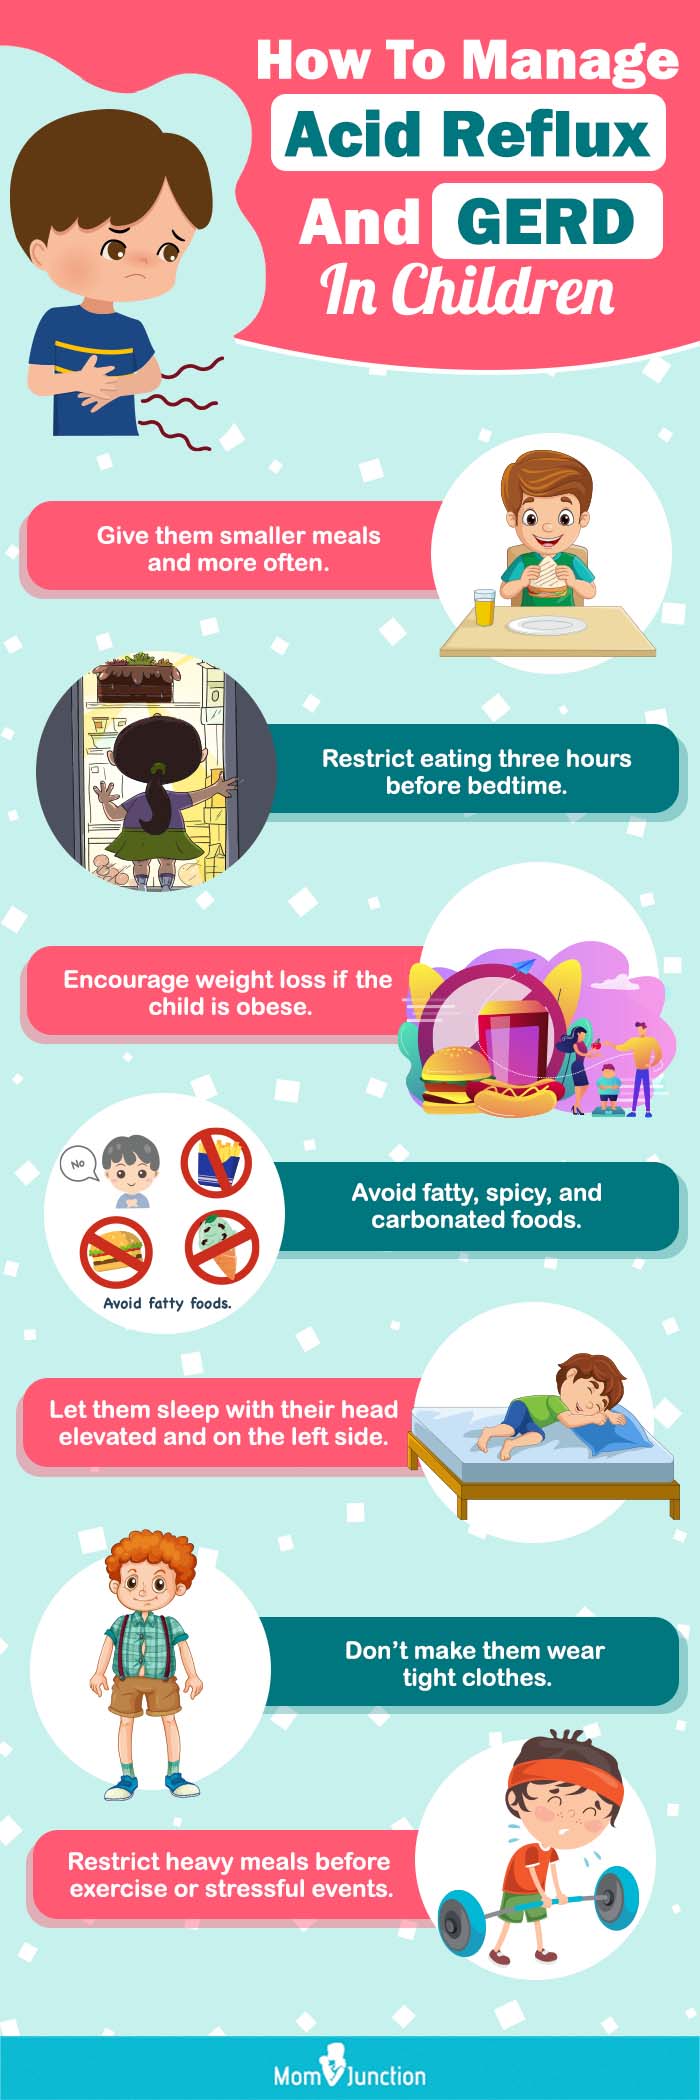 how to manage acid reflux and gerd in children (infographic)